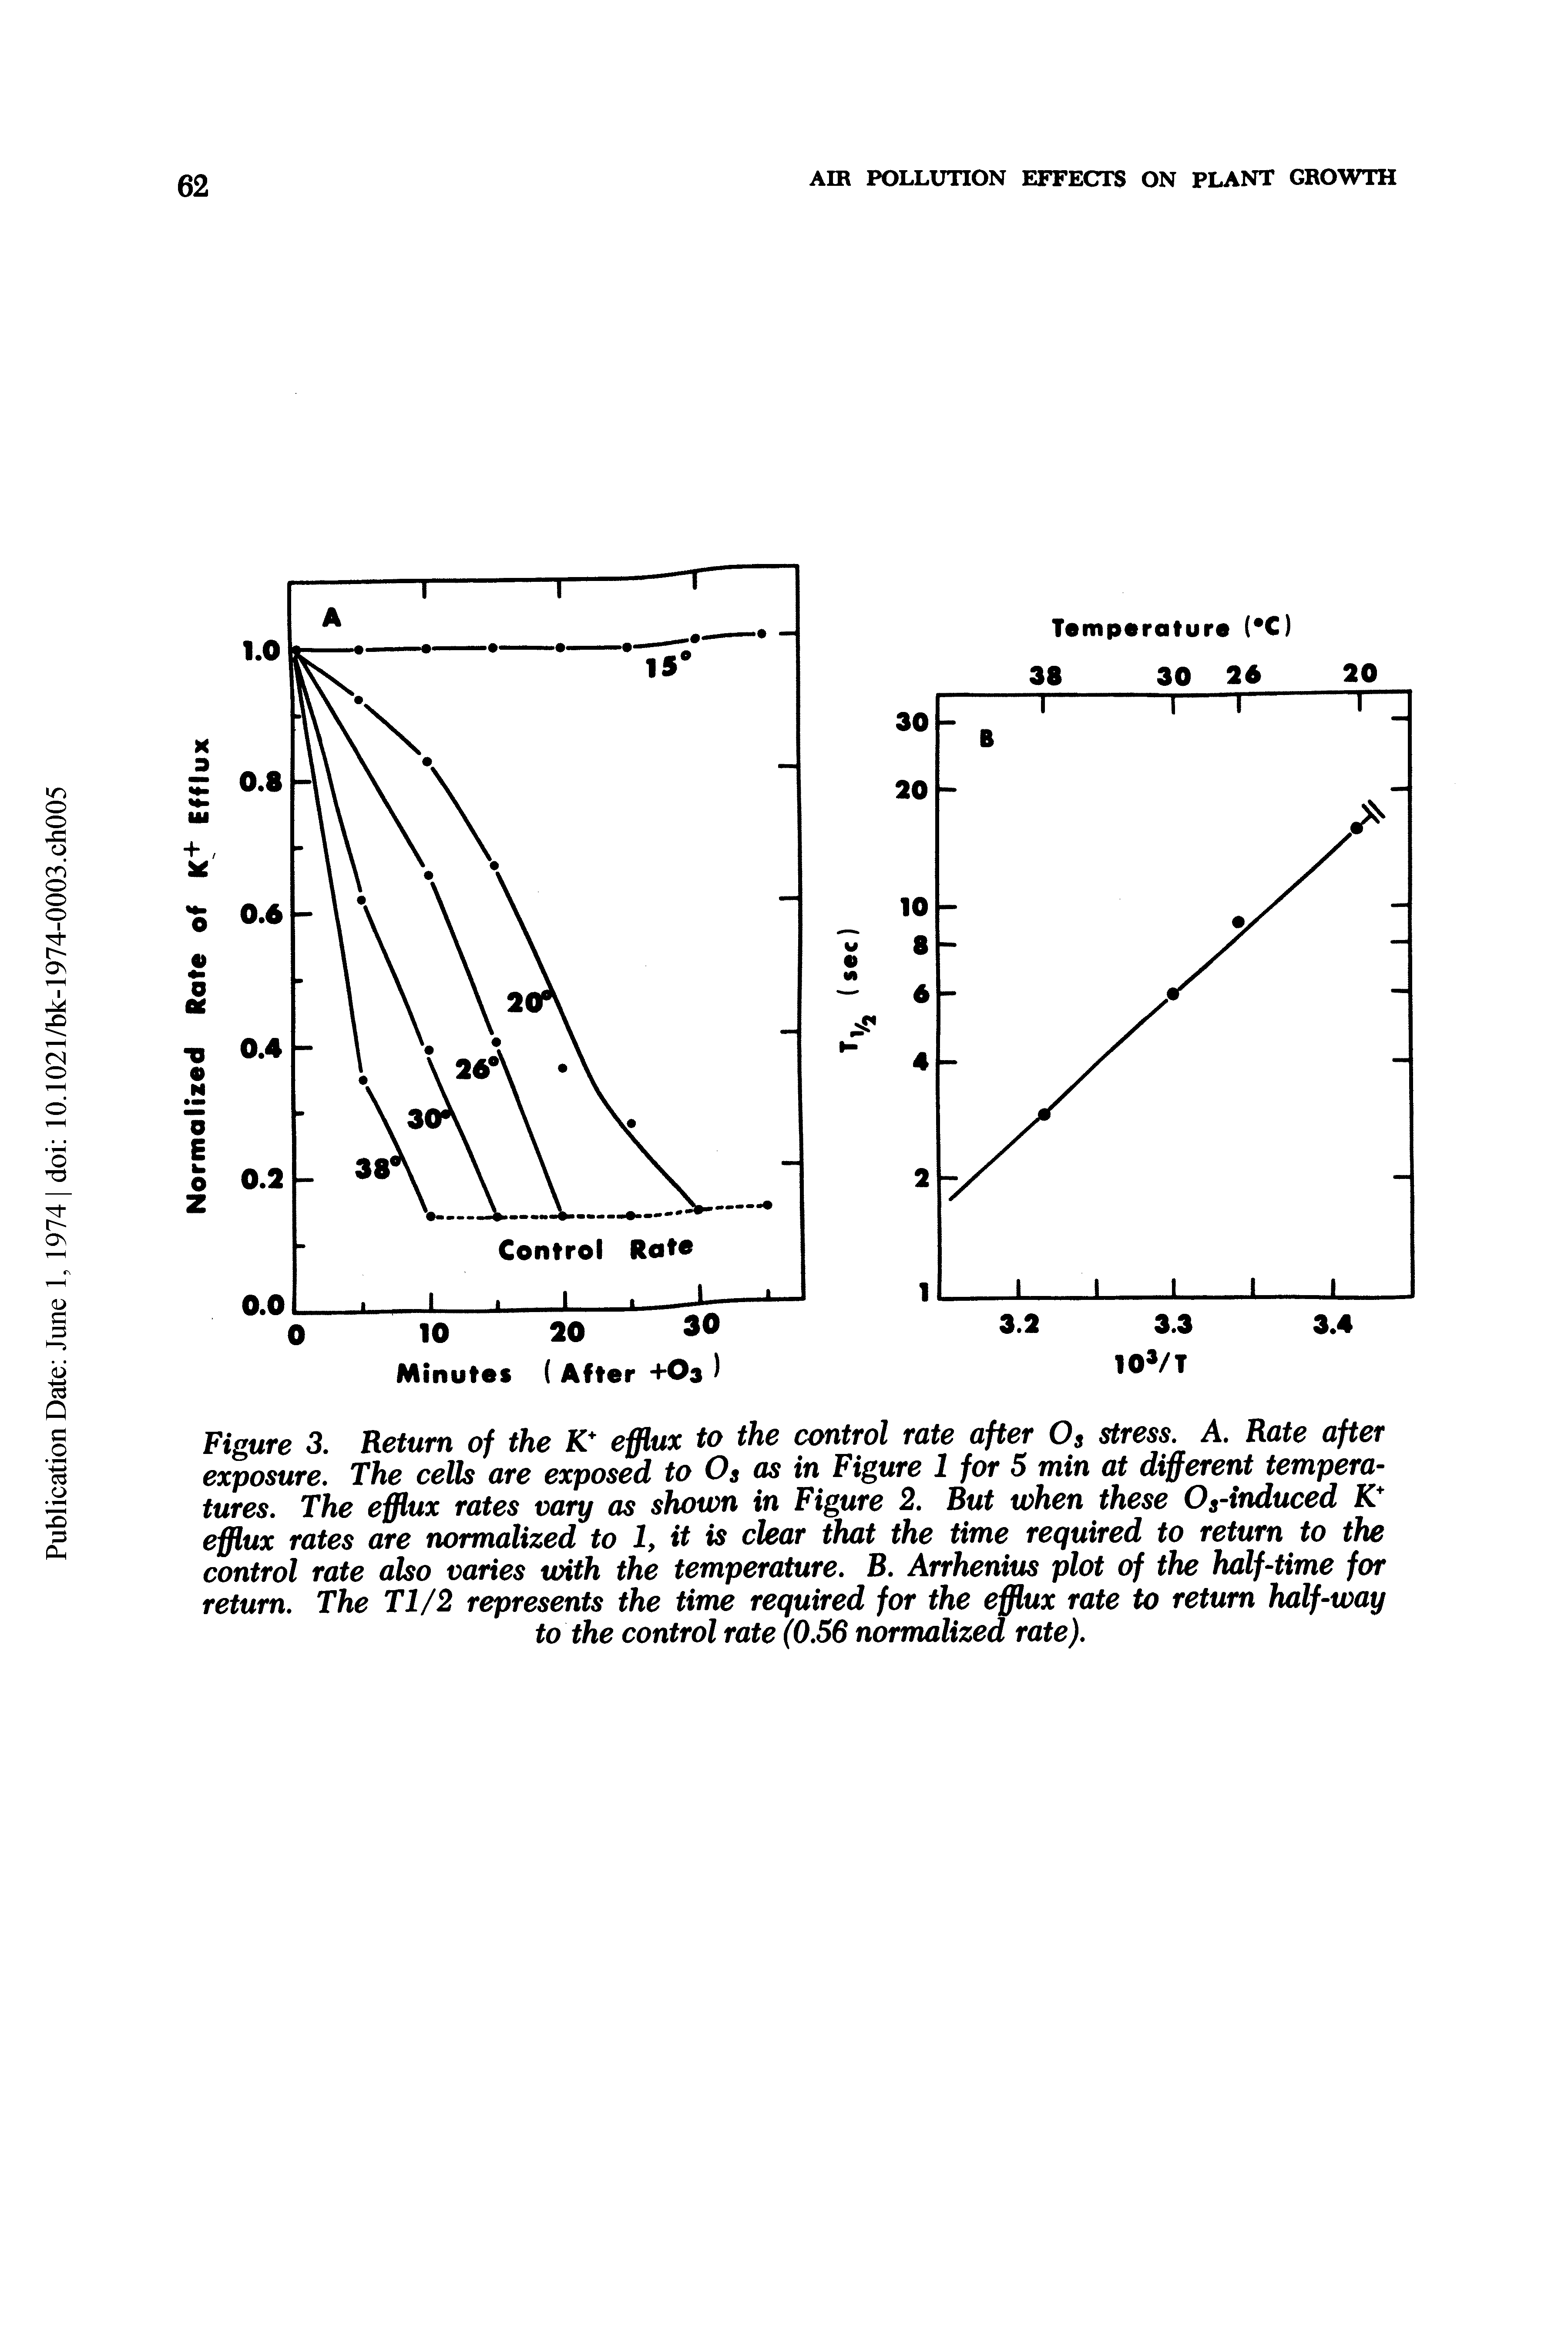 Figure 3. Return of the K efflux to the control rate after 0 stress. A. Rate after exposure. The cells are exposed to Os as in Figure 1 for 5 min at different temperatures. The efflux rates vary as shown in Figure 2. But when these Os-induced K efflux rates are normalized to 1, it is clear that the time required to return to the control rate also varies with the temperature. B. Arrhenius plot of the half-time for return. The Tl/2 represents the time required for the efflux rate to return half-way to the control rate (0.56 normalized rate).